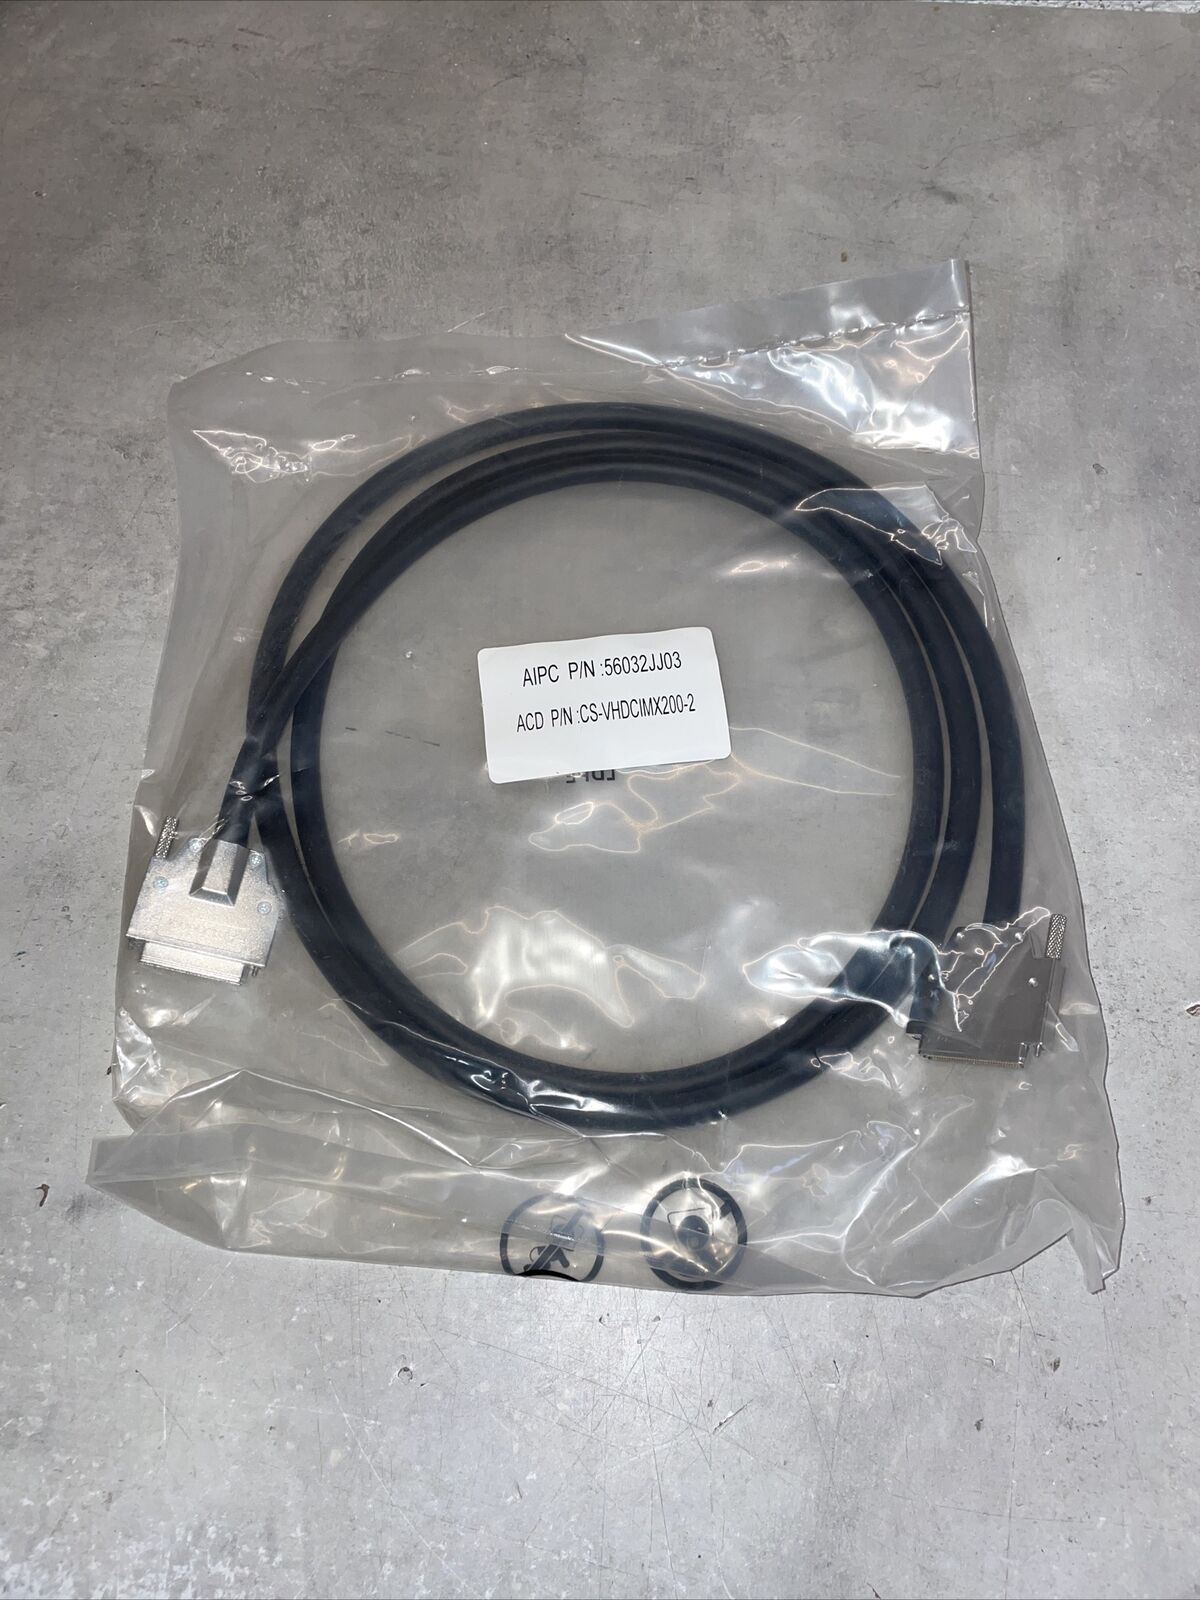 Amphenol CS-VHDCIMX200-002 VHDCI SCSI SCSI-5 Cable, VHDCI Male to Male, 6FT